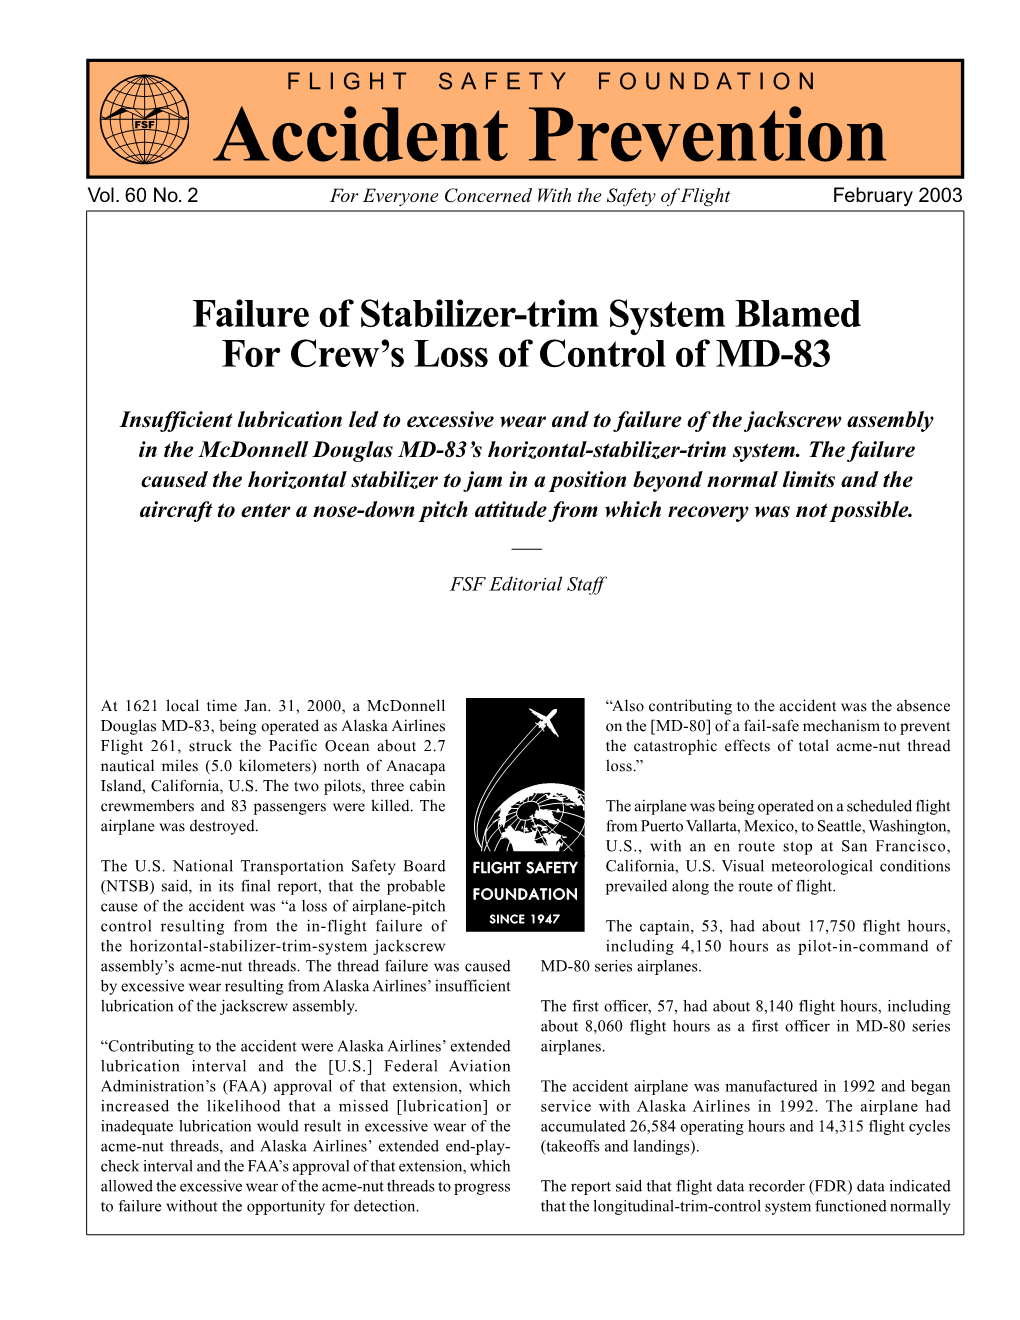 Accident Prevention February 2003